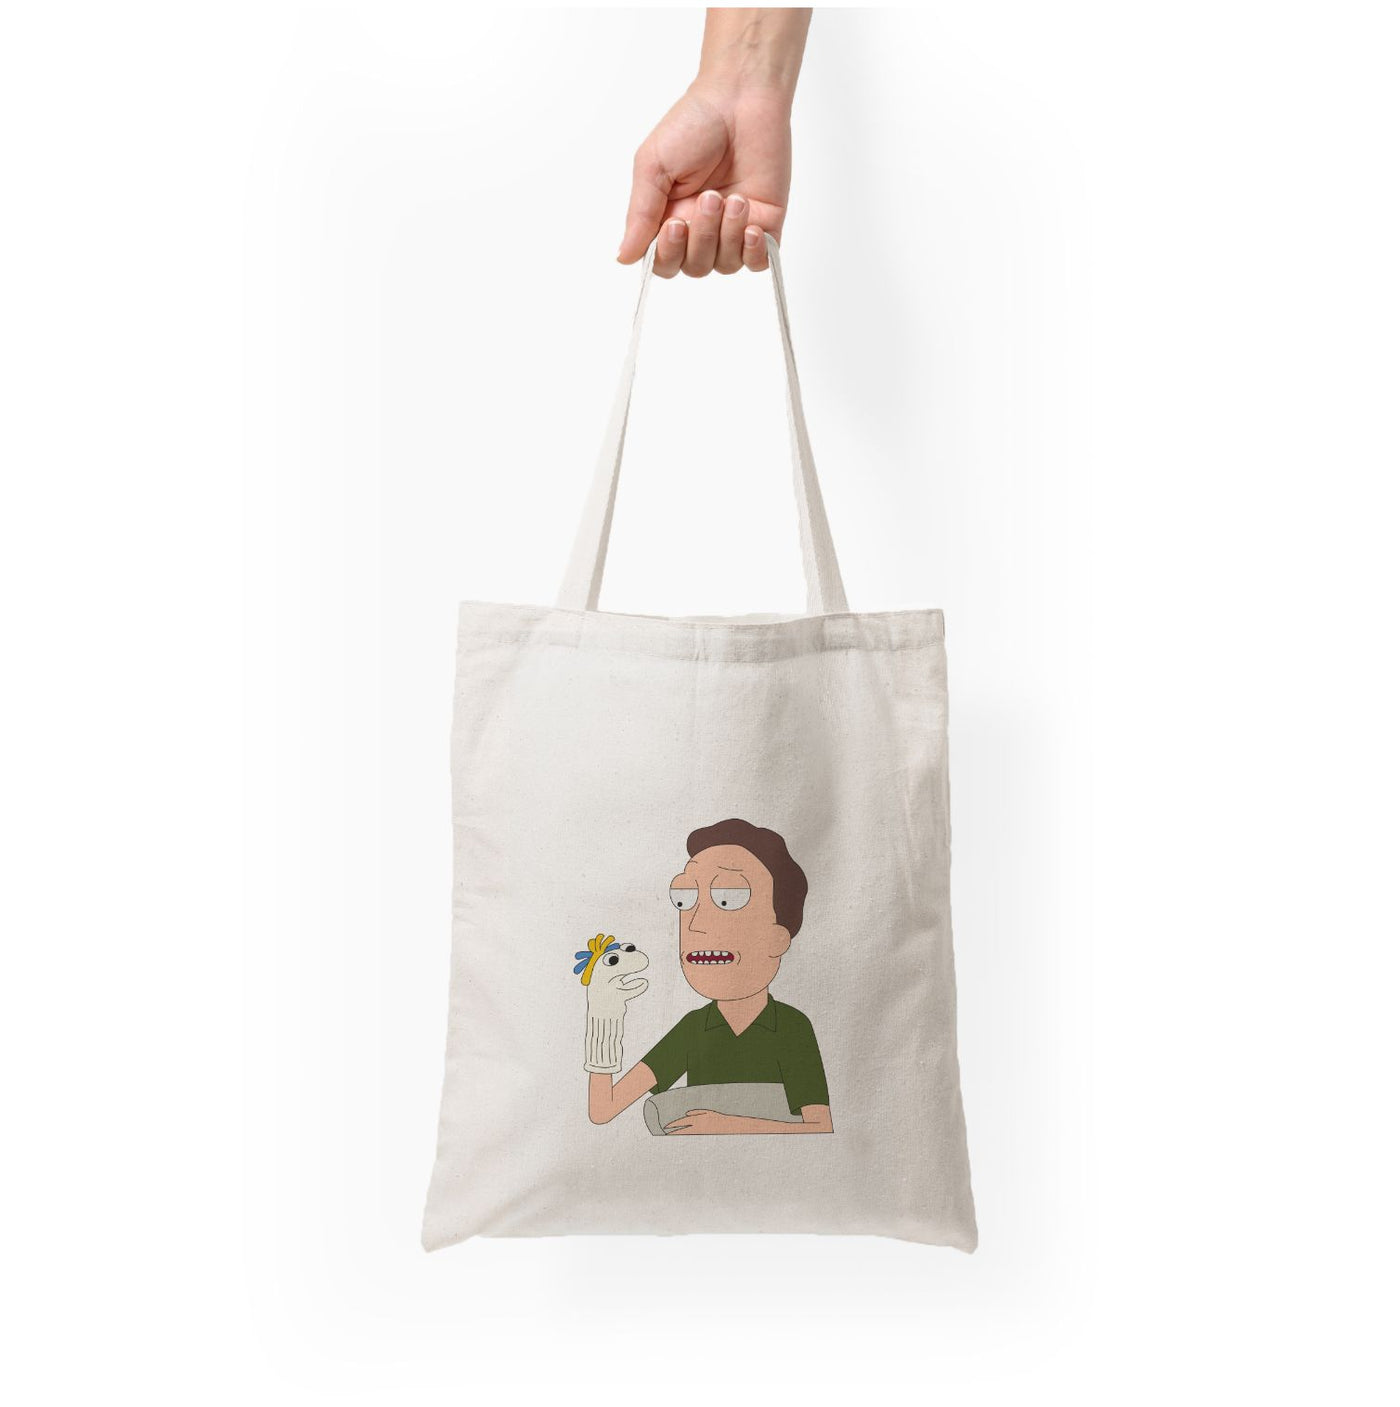 Puppet - Rick And Morty Tote Bag